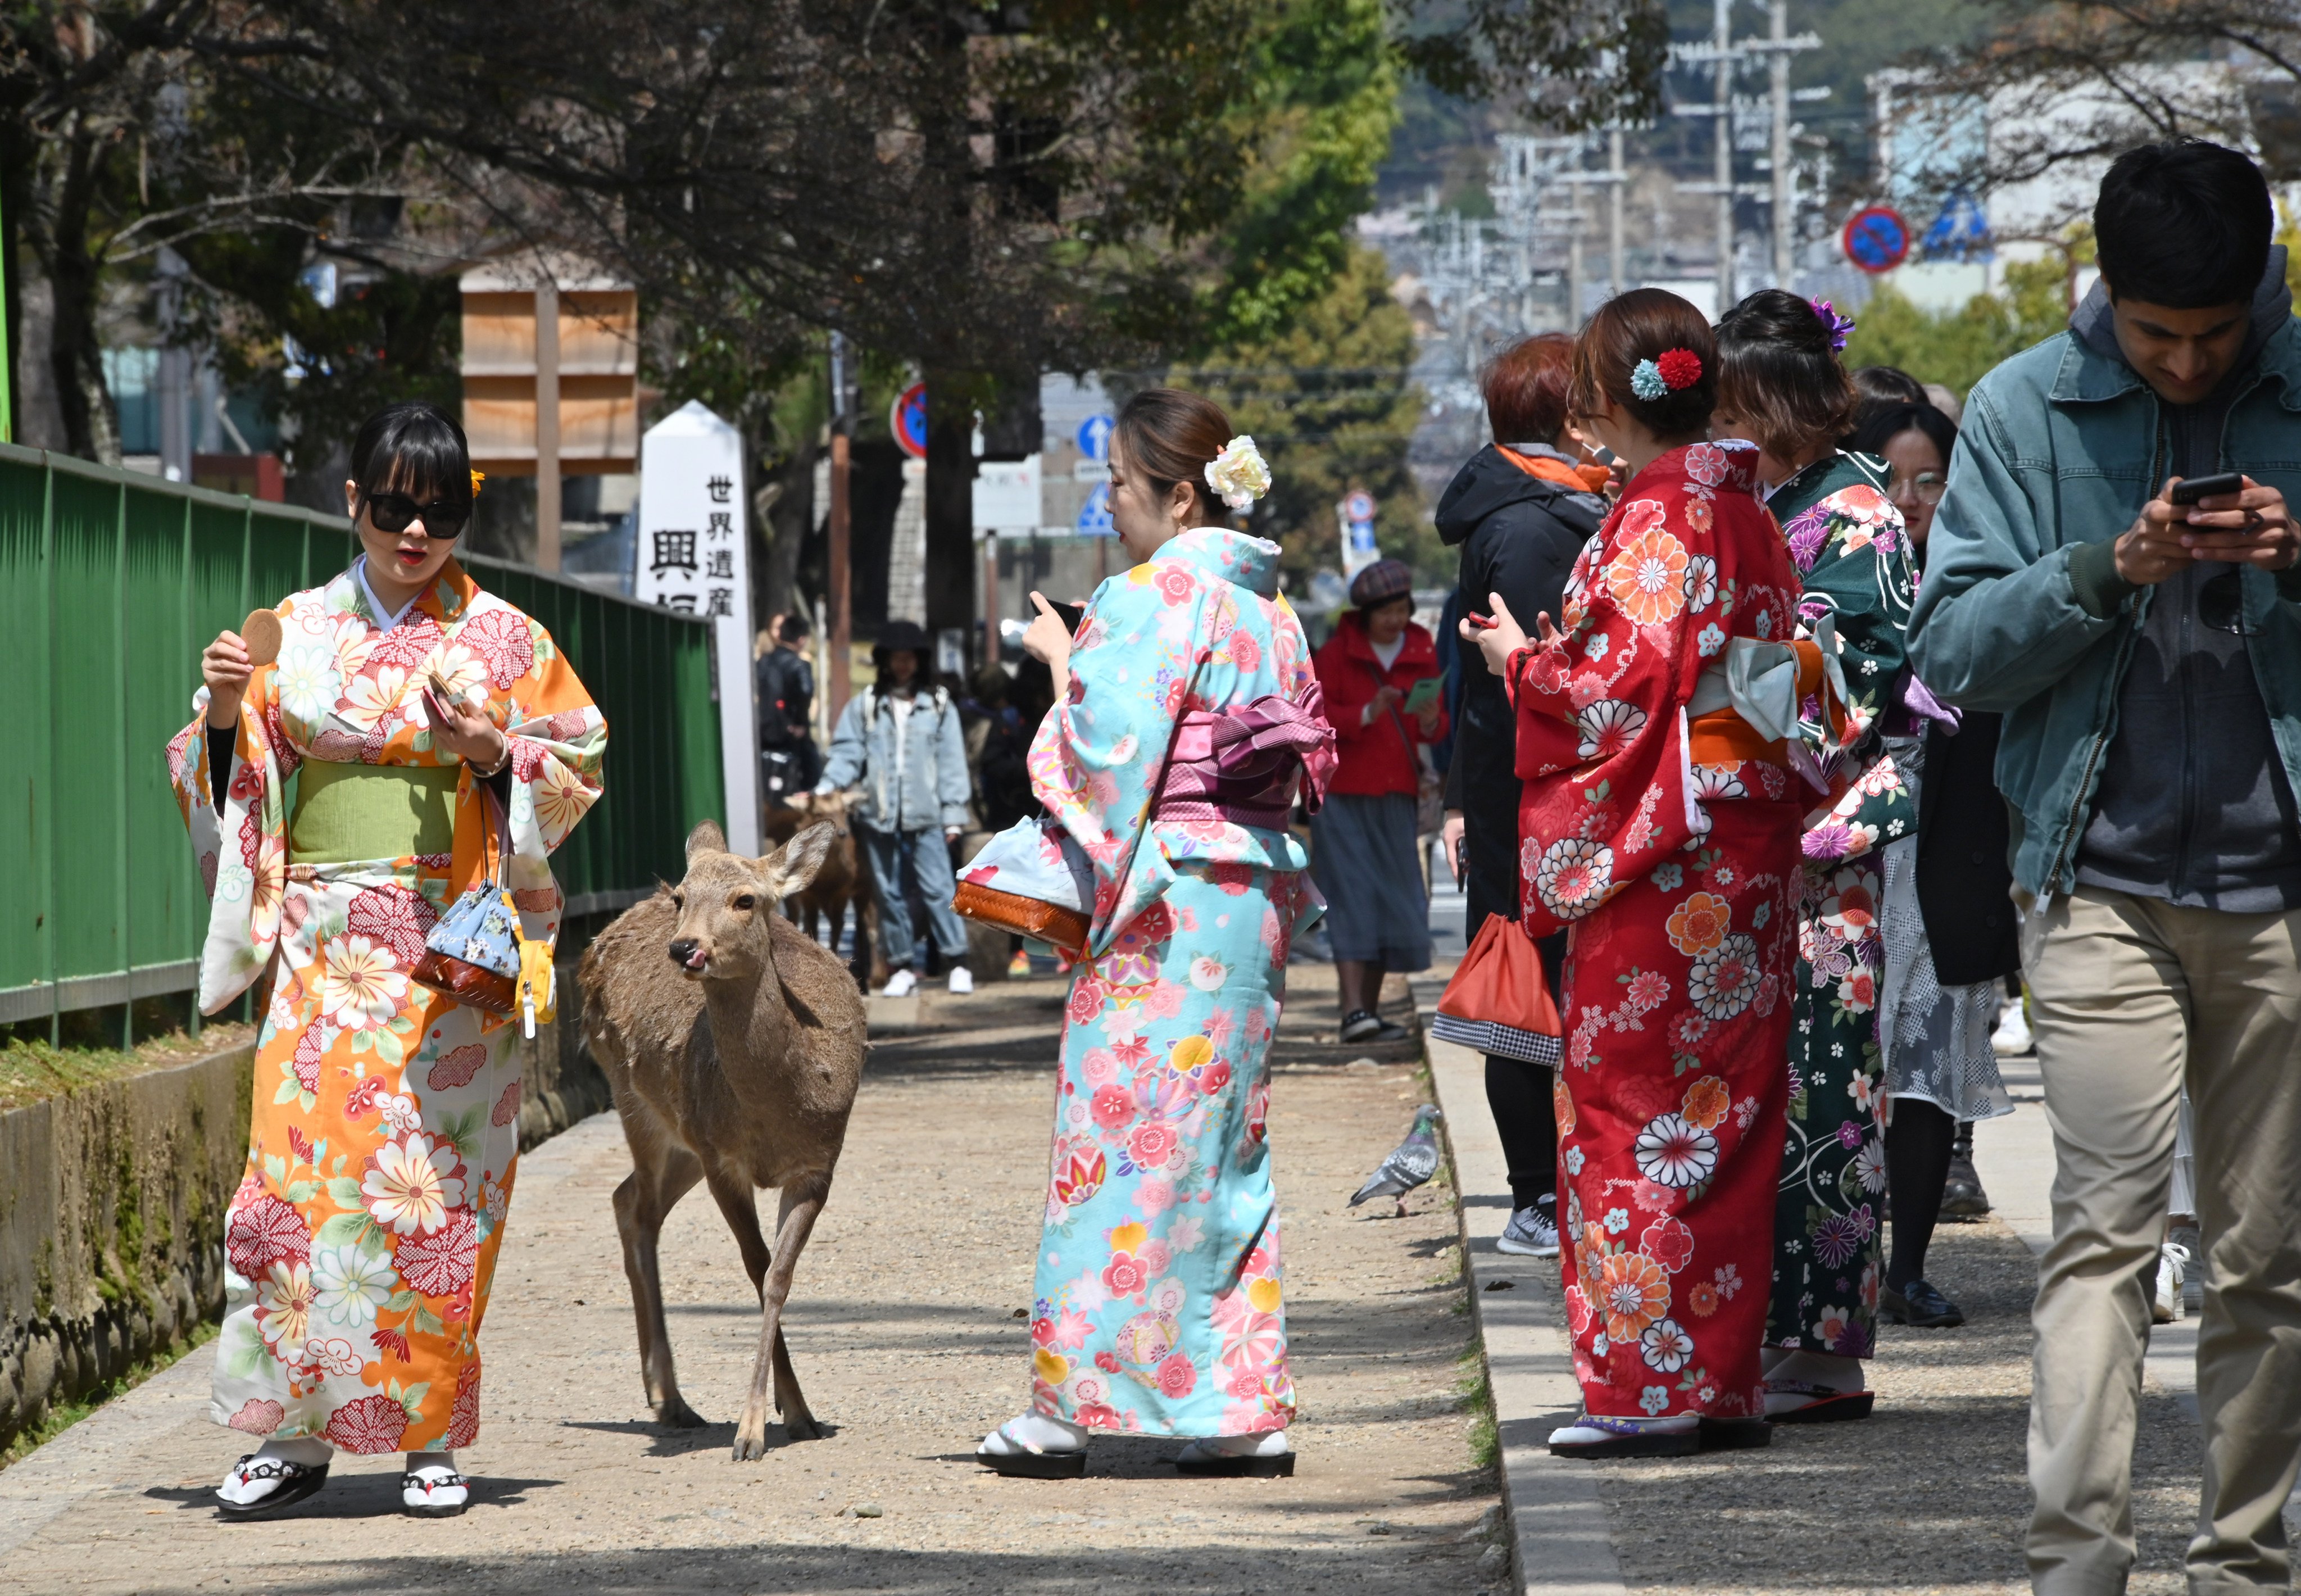 Tourists feed a deer at Nara Park in Japan. Photo: Getty Images